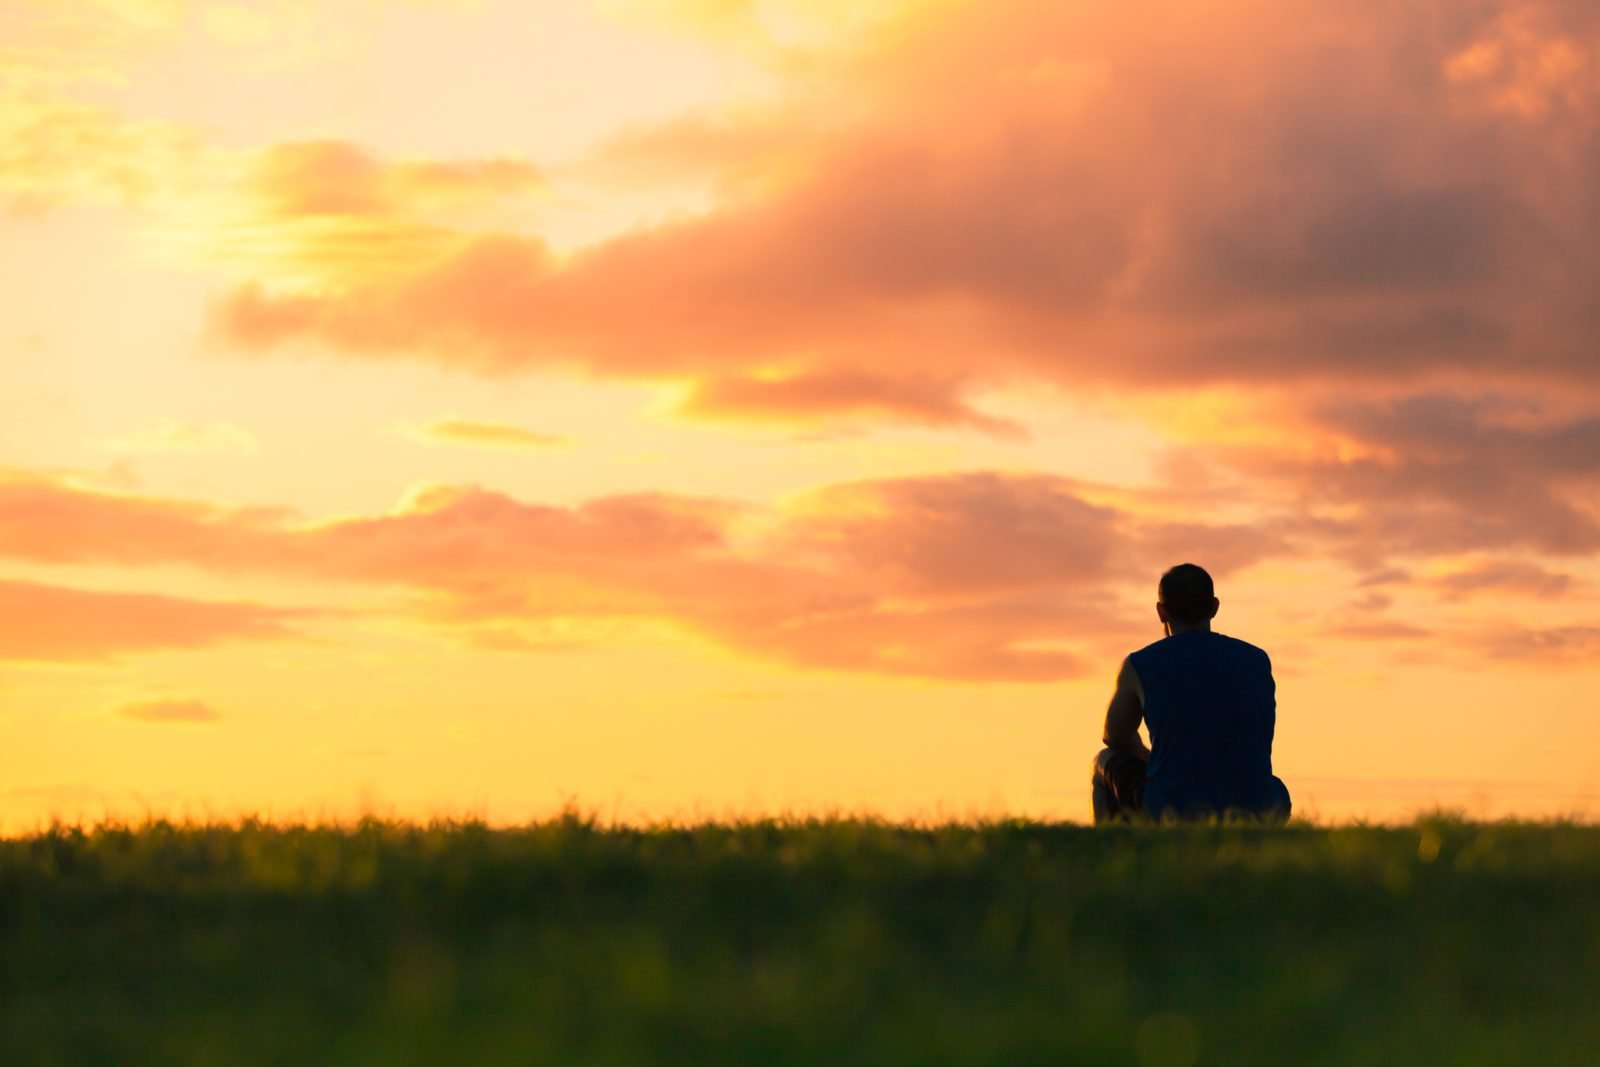 Image of someone sitting in front of a sunset